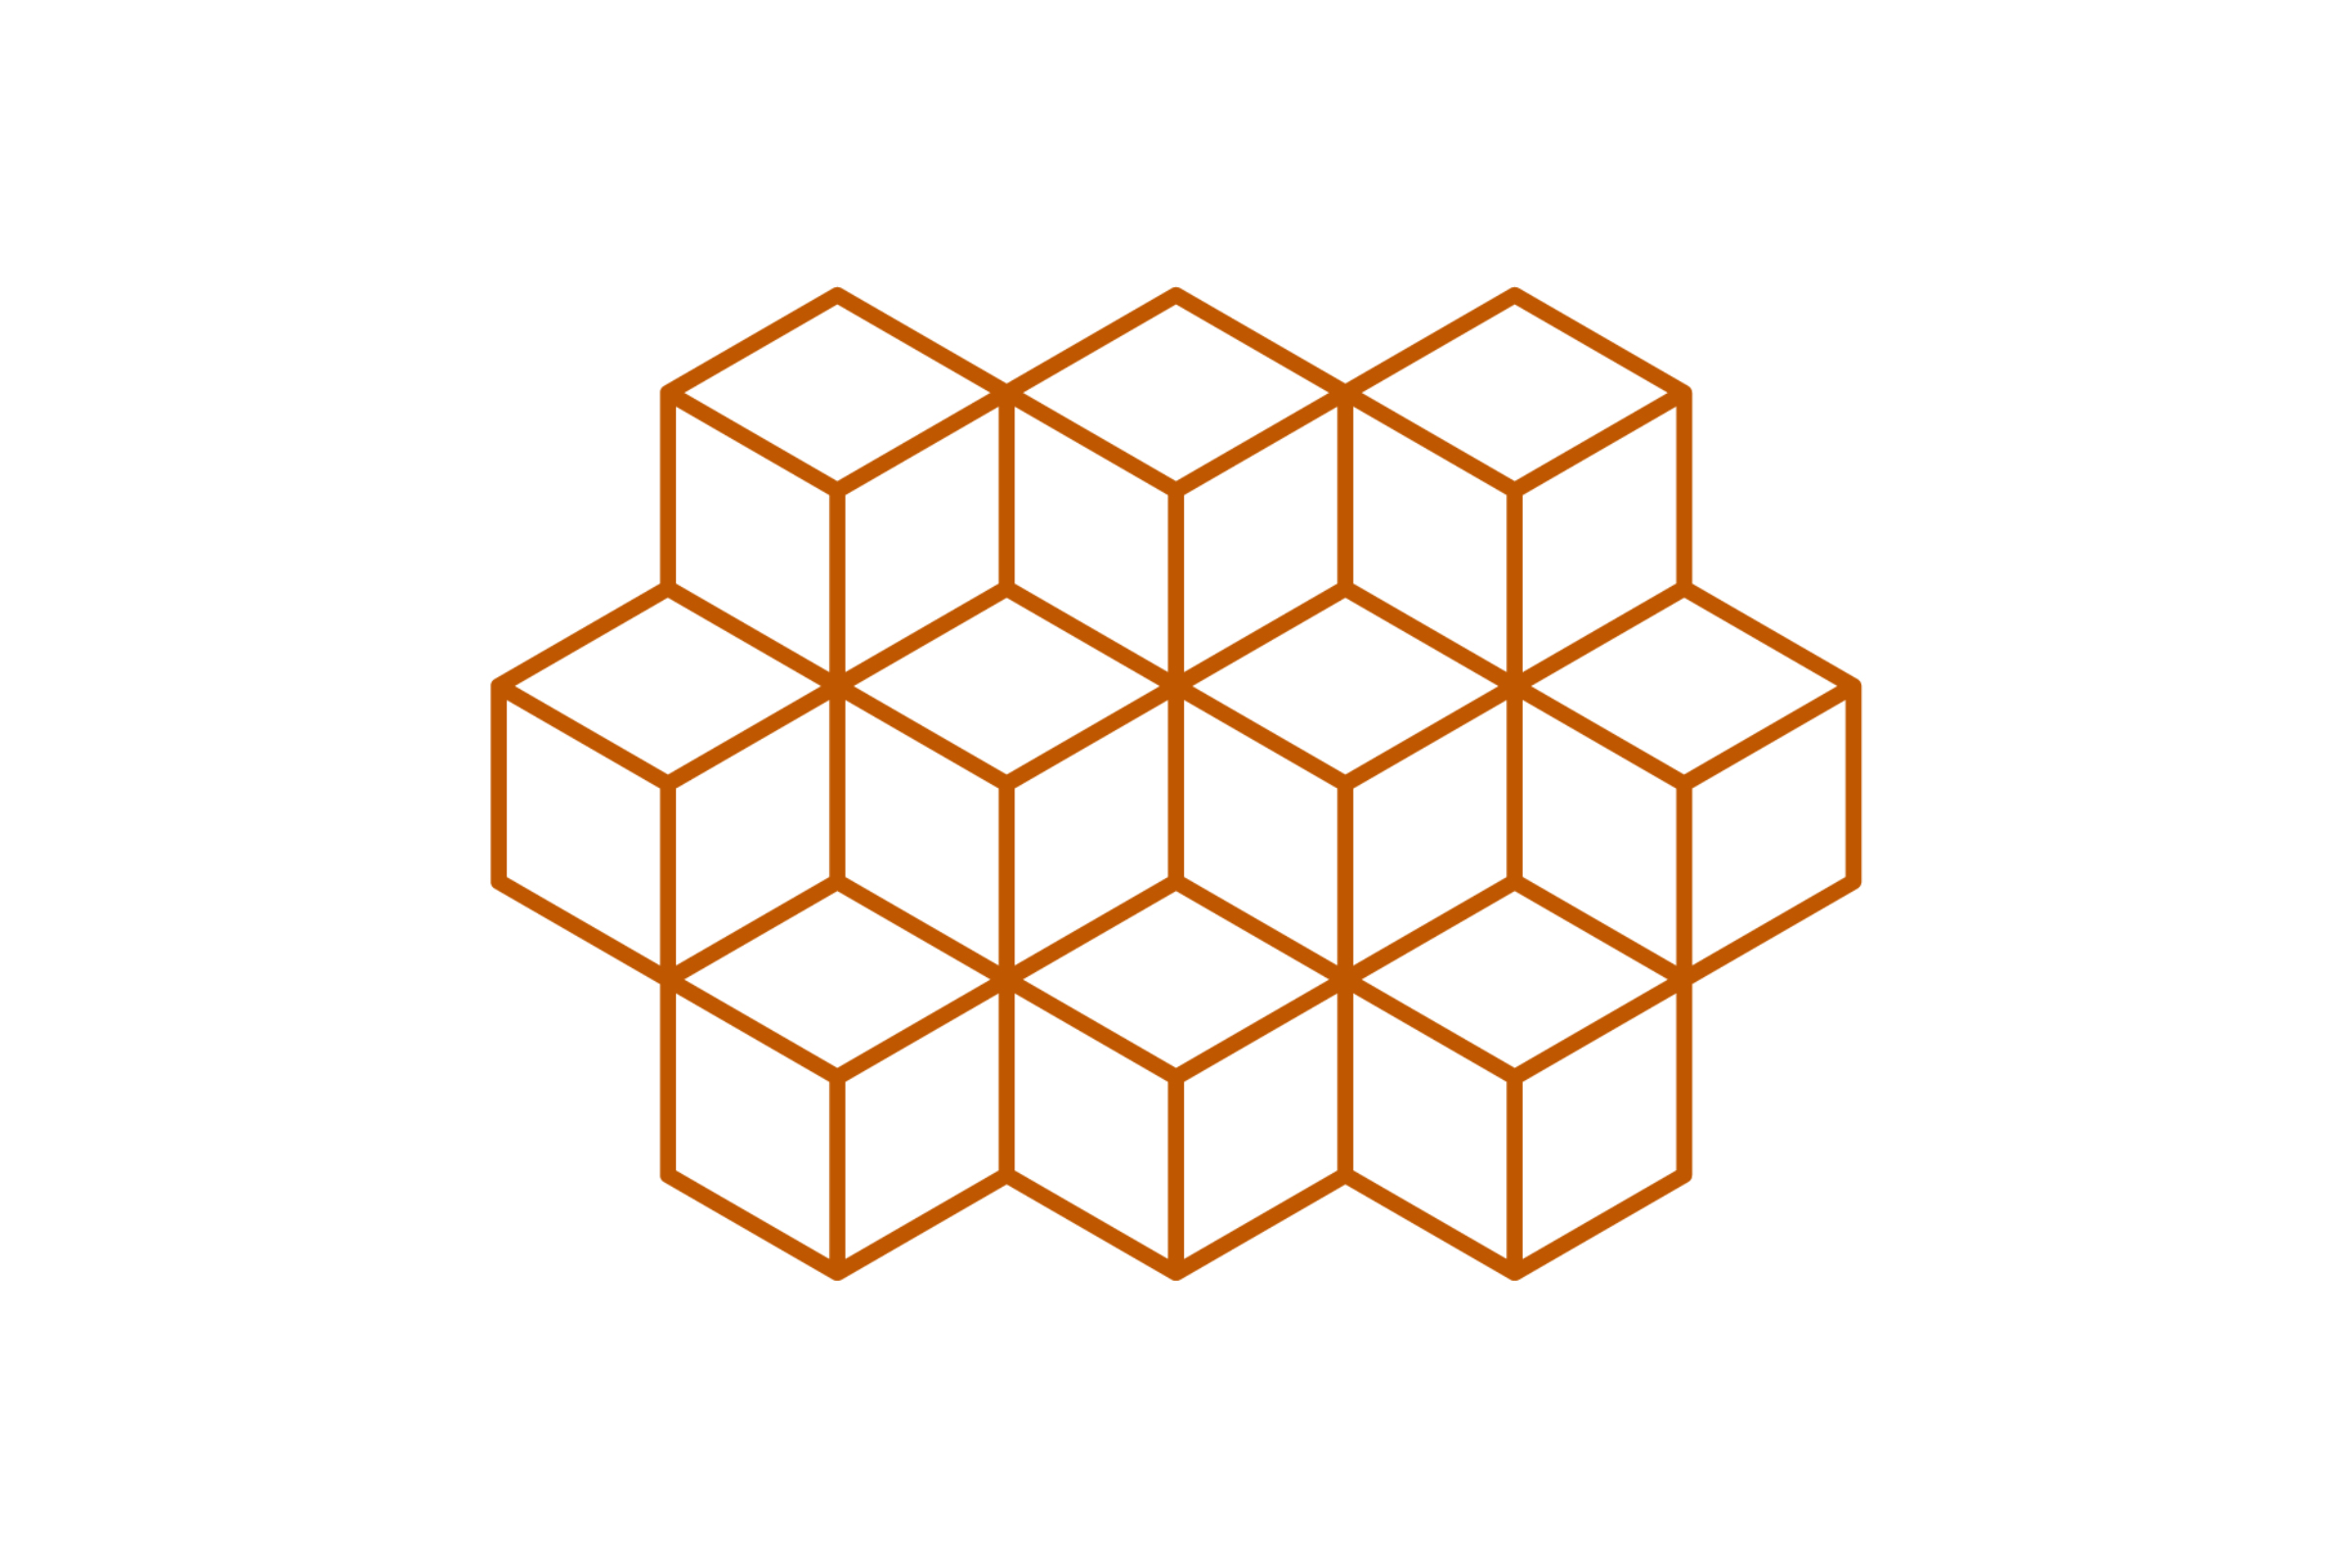 A burnt orange icon that resembles a rhombille grid "tessellation of the plain in identical rhombi"